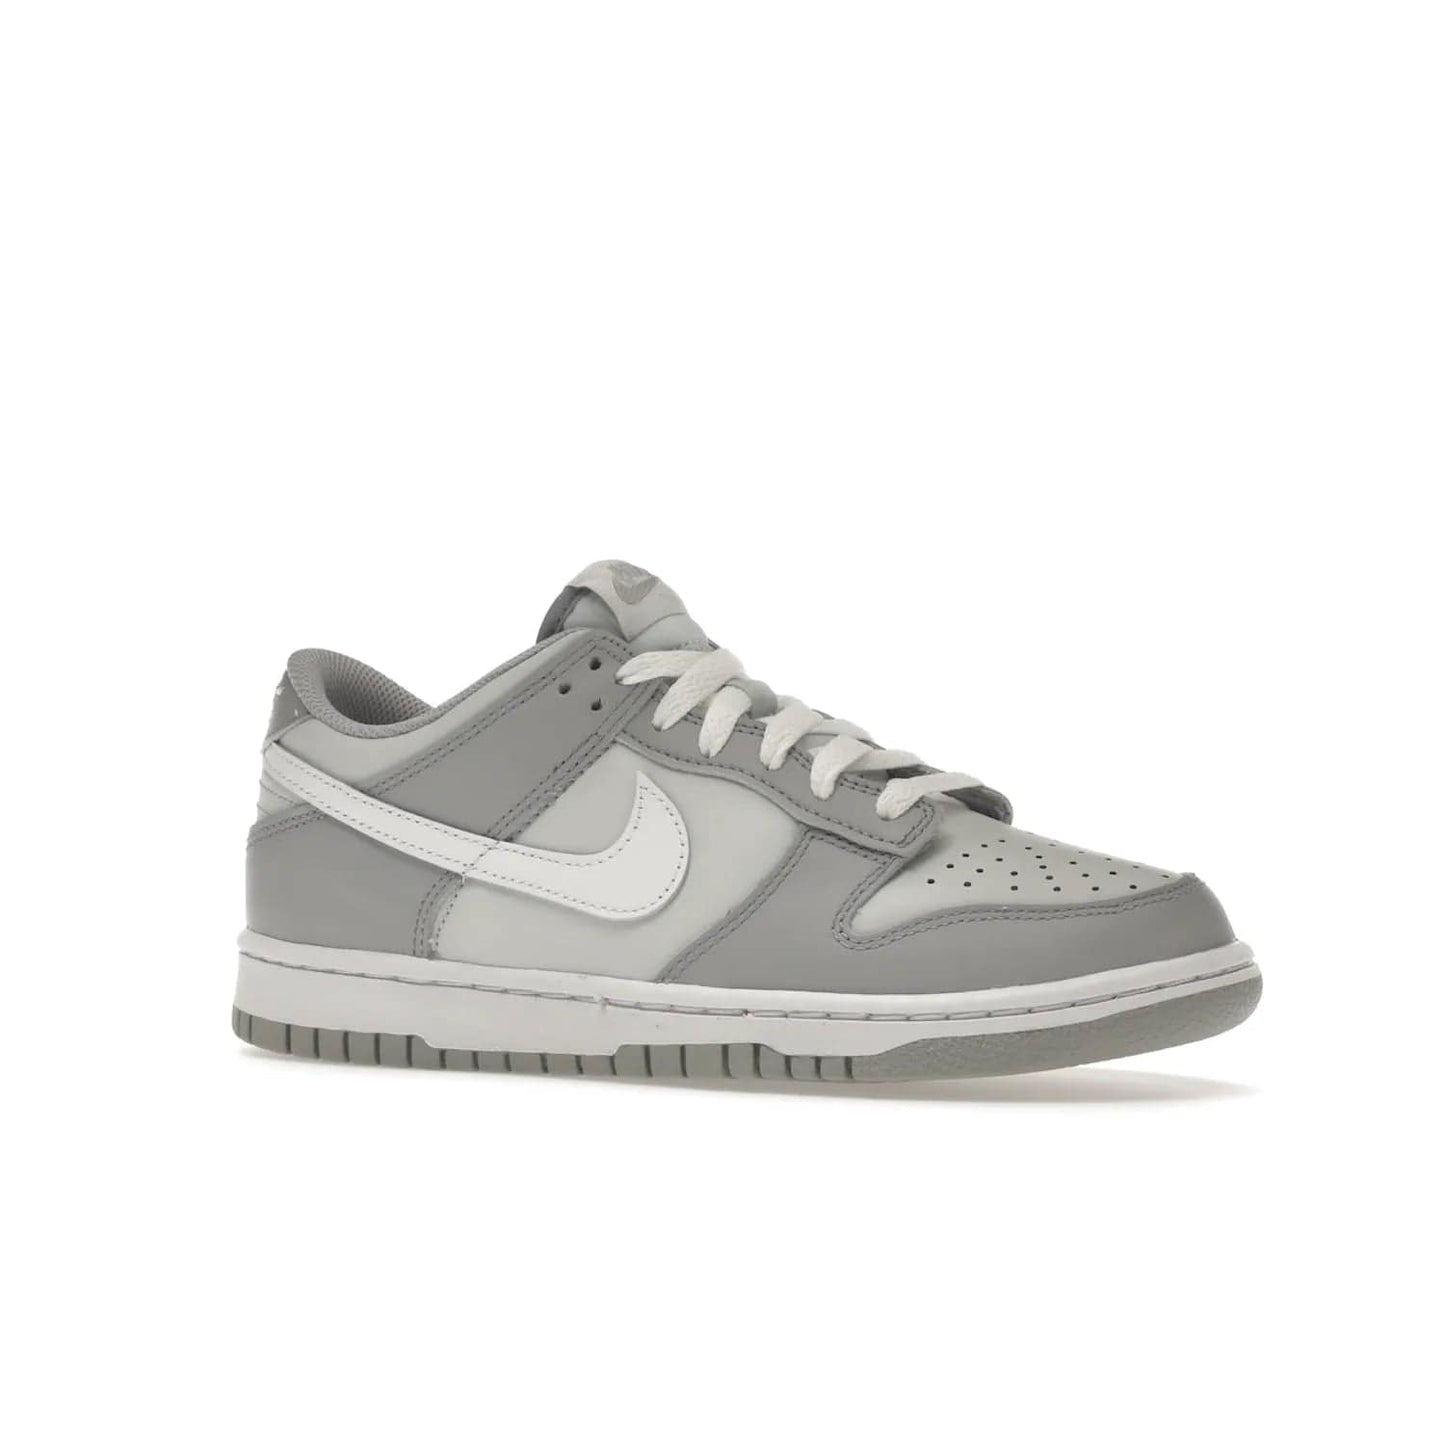 Nike Dunk Low Two-Toned Grey (GS) - Image 4 - Only at www.BallersClubKickz.com - Stylish Nike Dunk Low GS Two-Toned Grey featuring leather build, light/dark grey shades, white Swoosh logo & gray rubber outsole. Get ready to make a statement with this timeless classic released in March 2022.